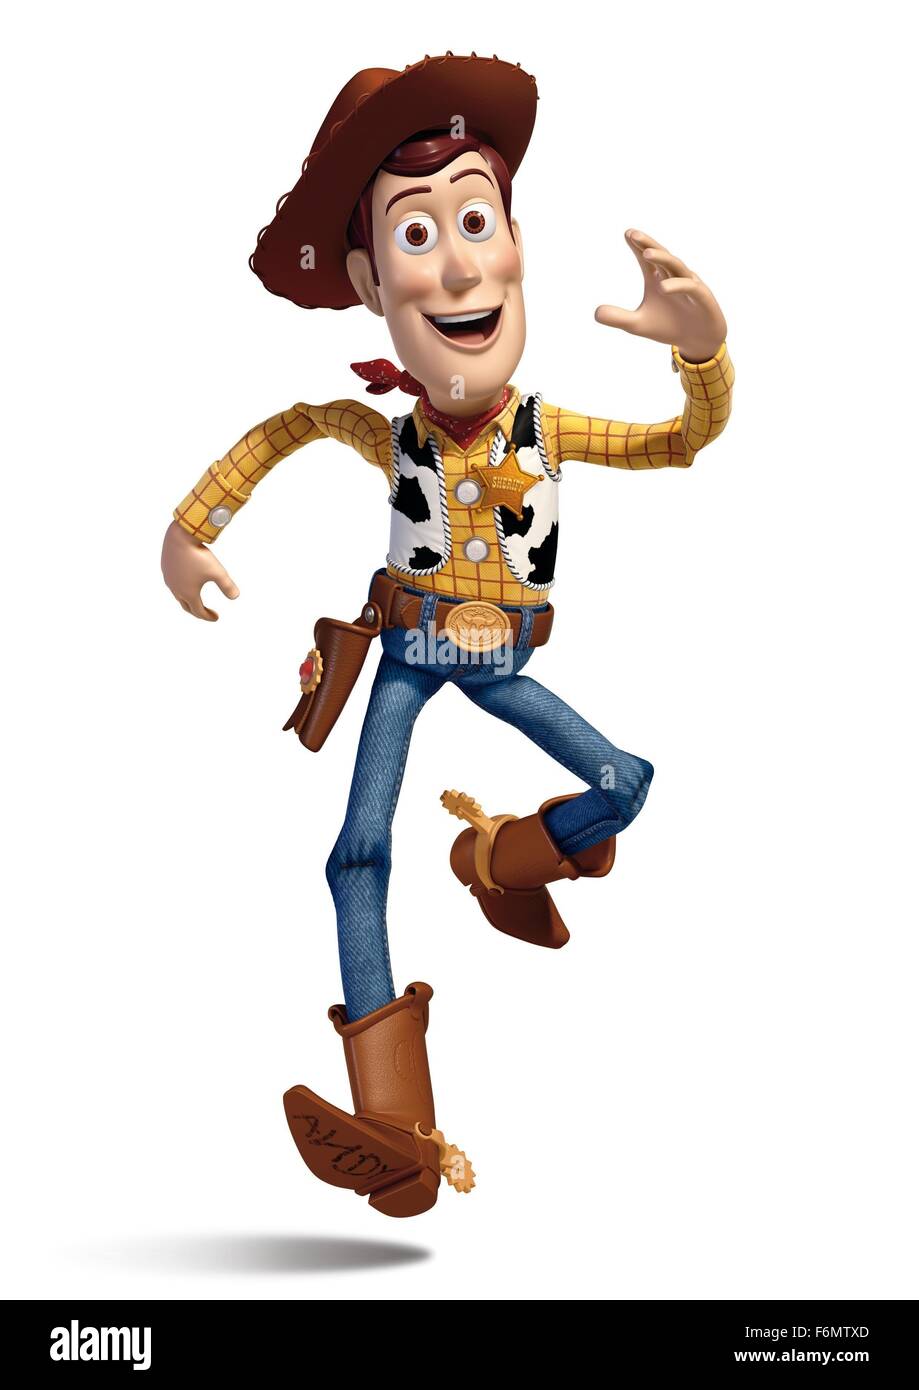 Toy story Cut Out Stock Images & Pictures - Alamy